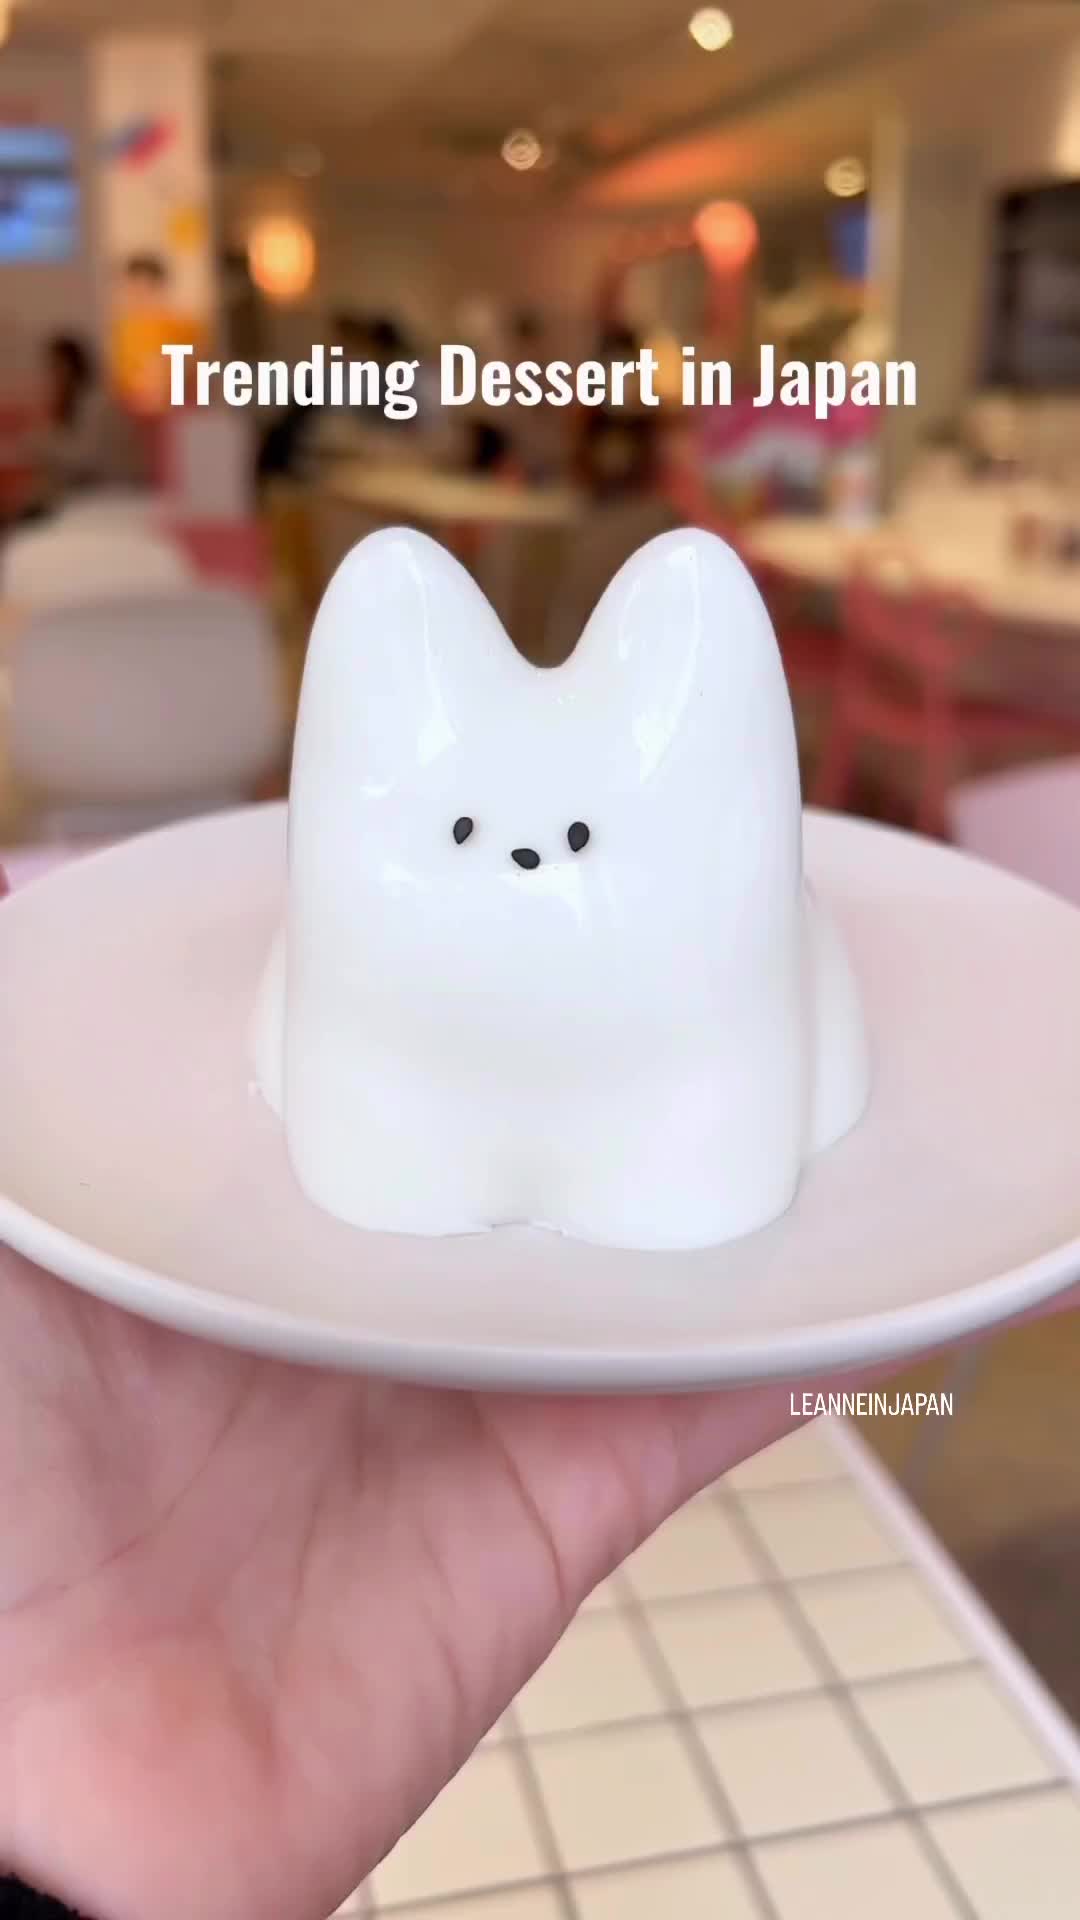 Jiggly Cat Pudding at NAMCHINI82 Cafe in Tokyo!